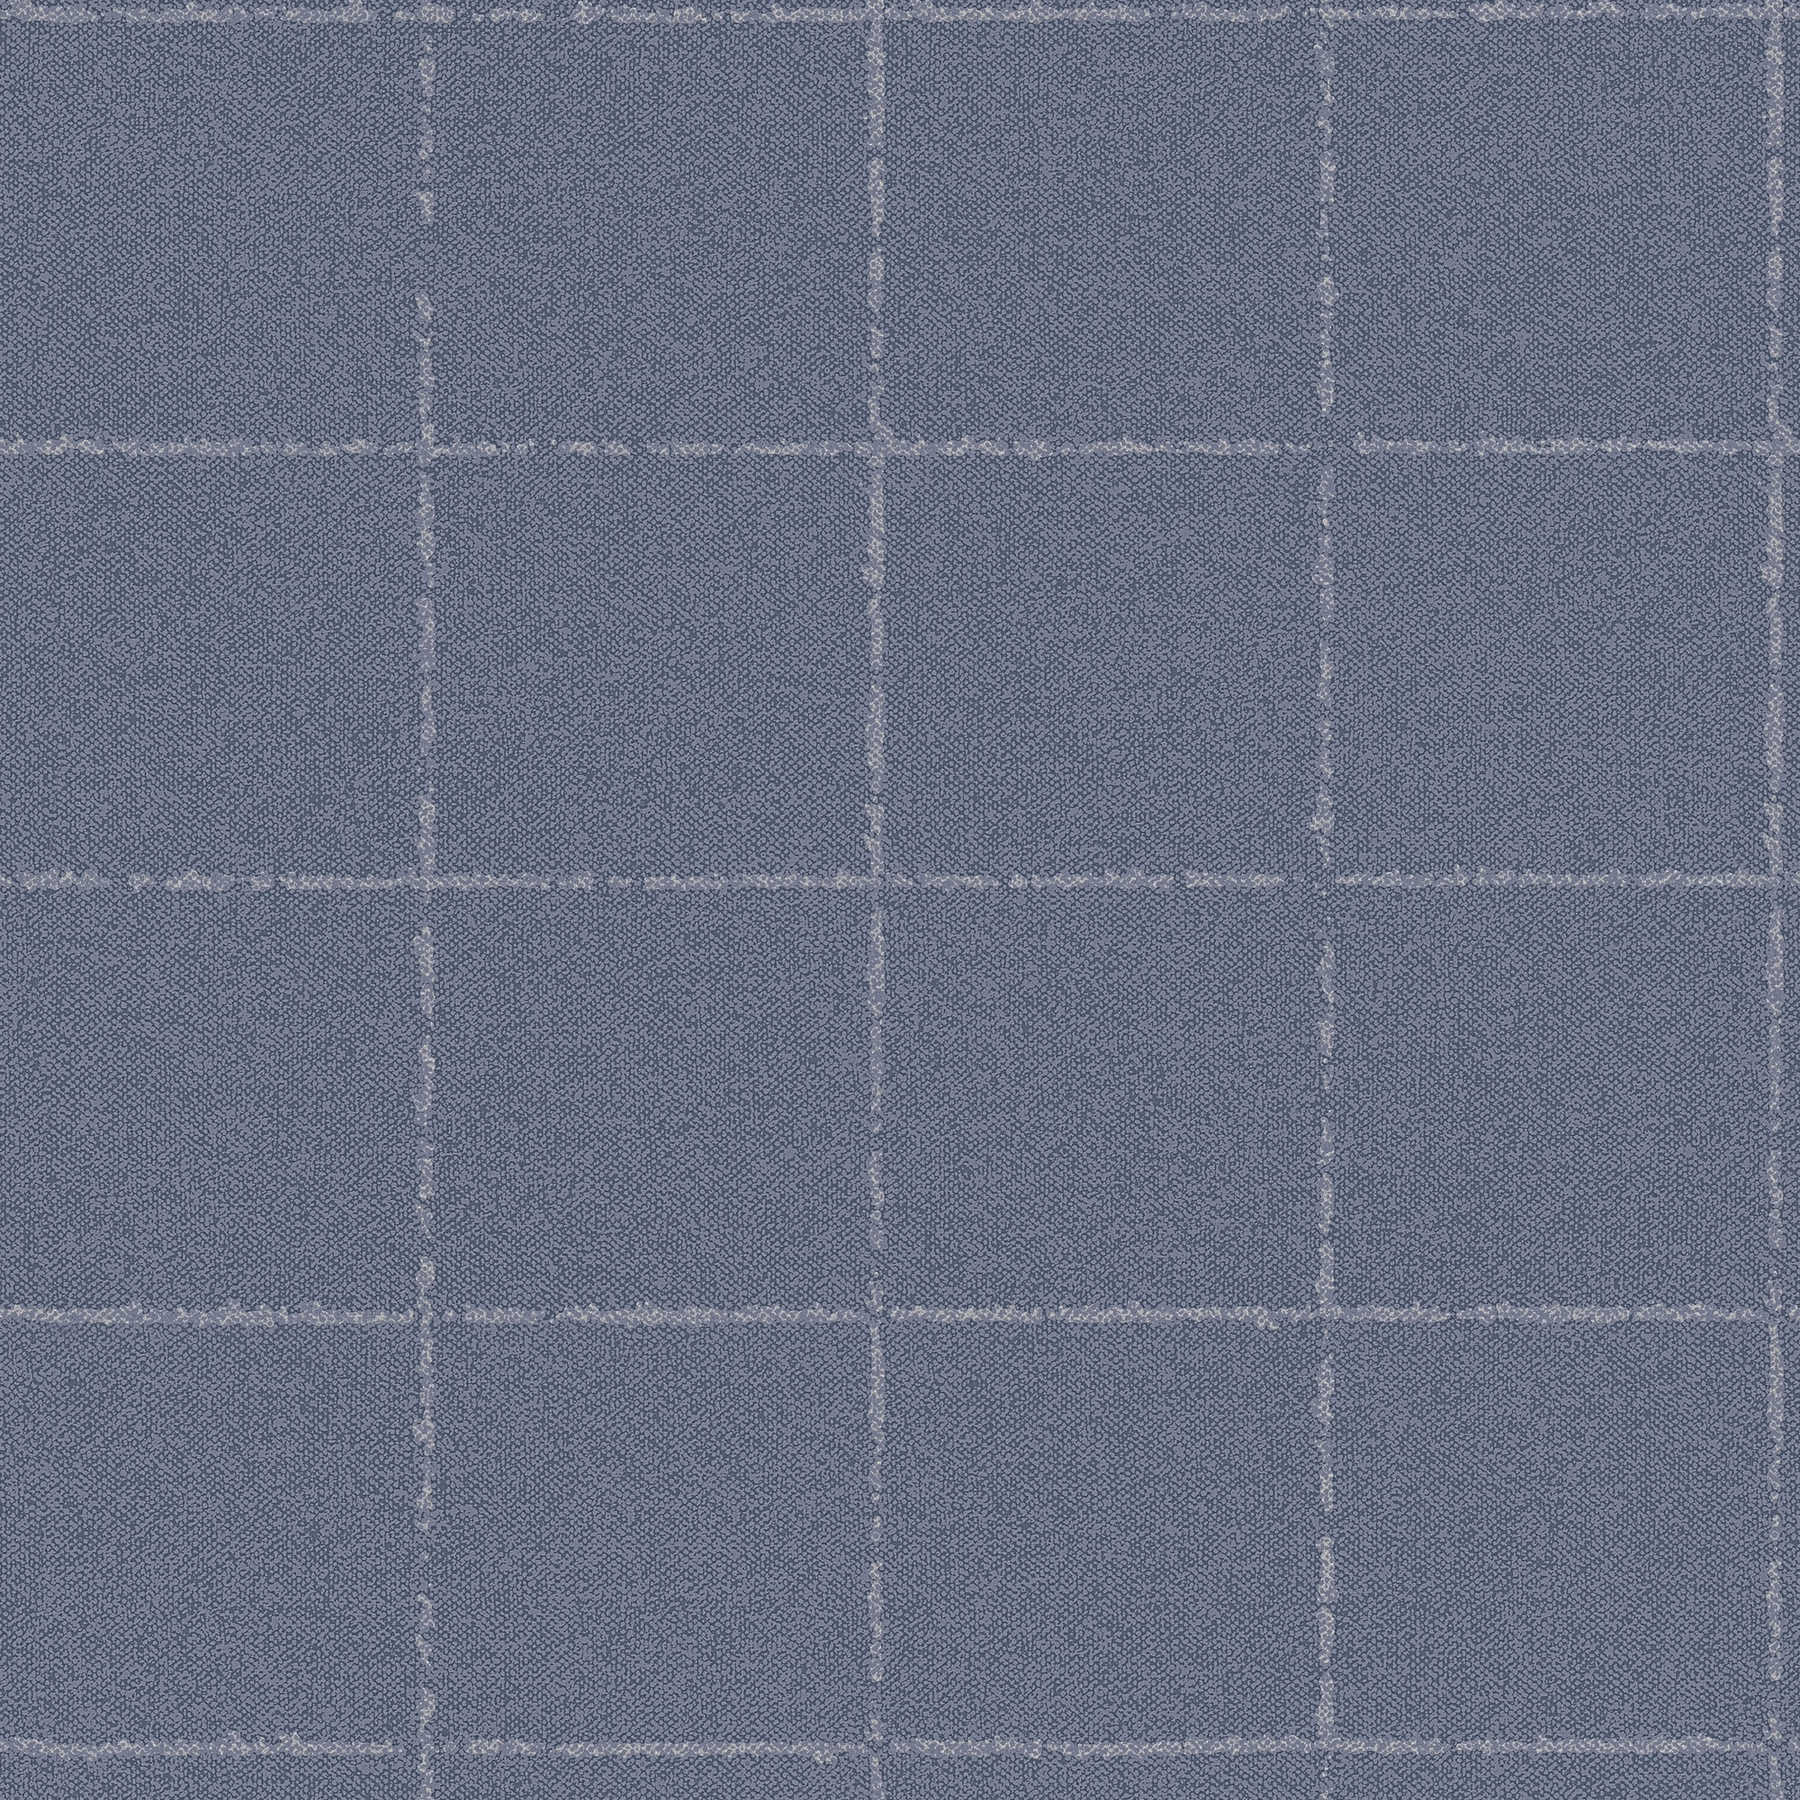 Checked wallpaper in textile look - blue
